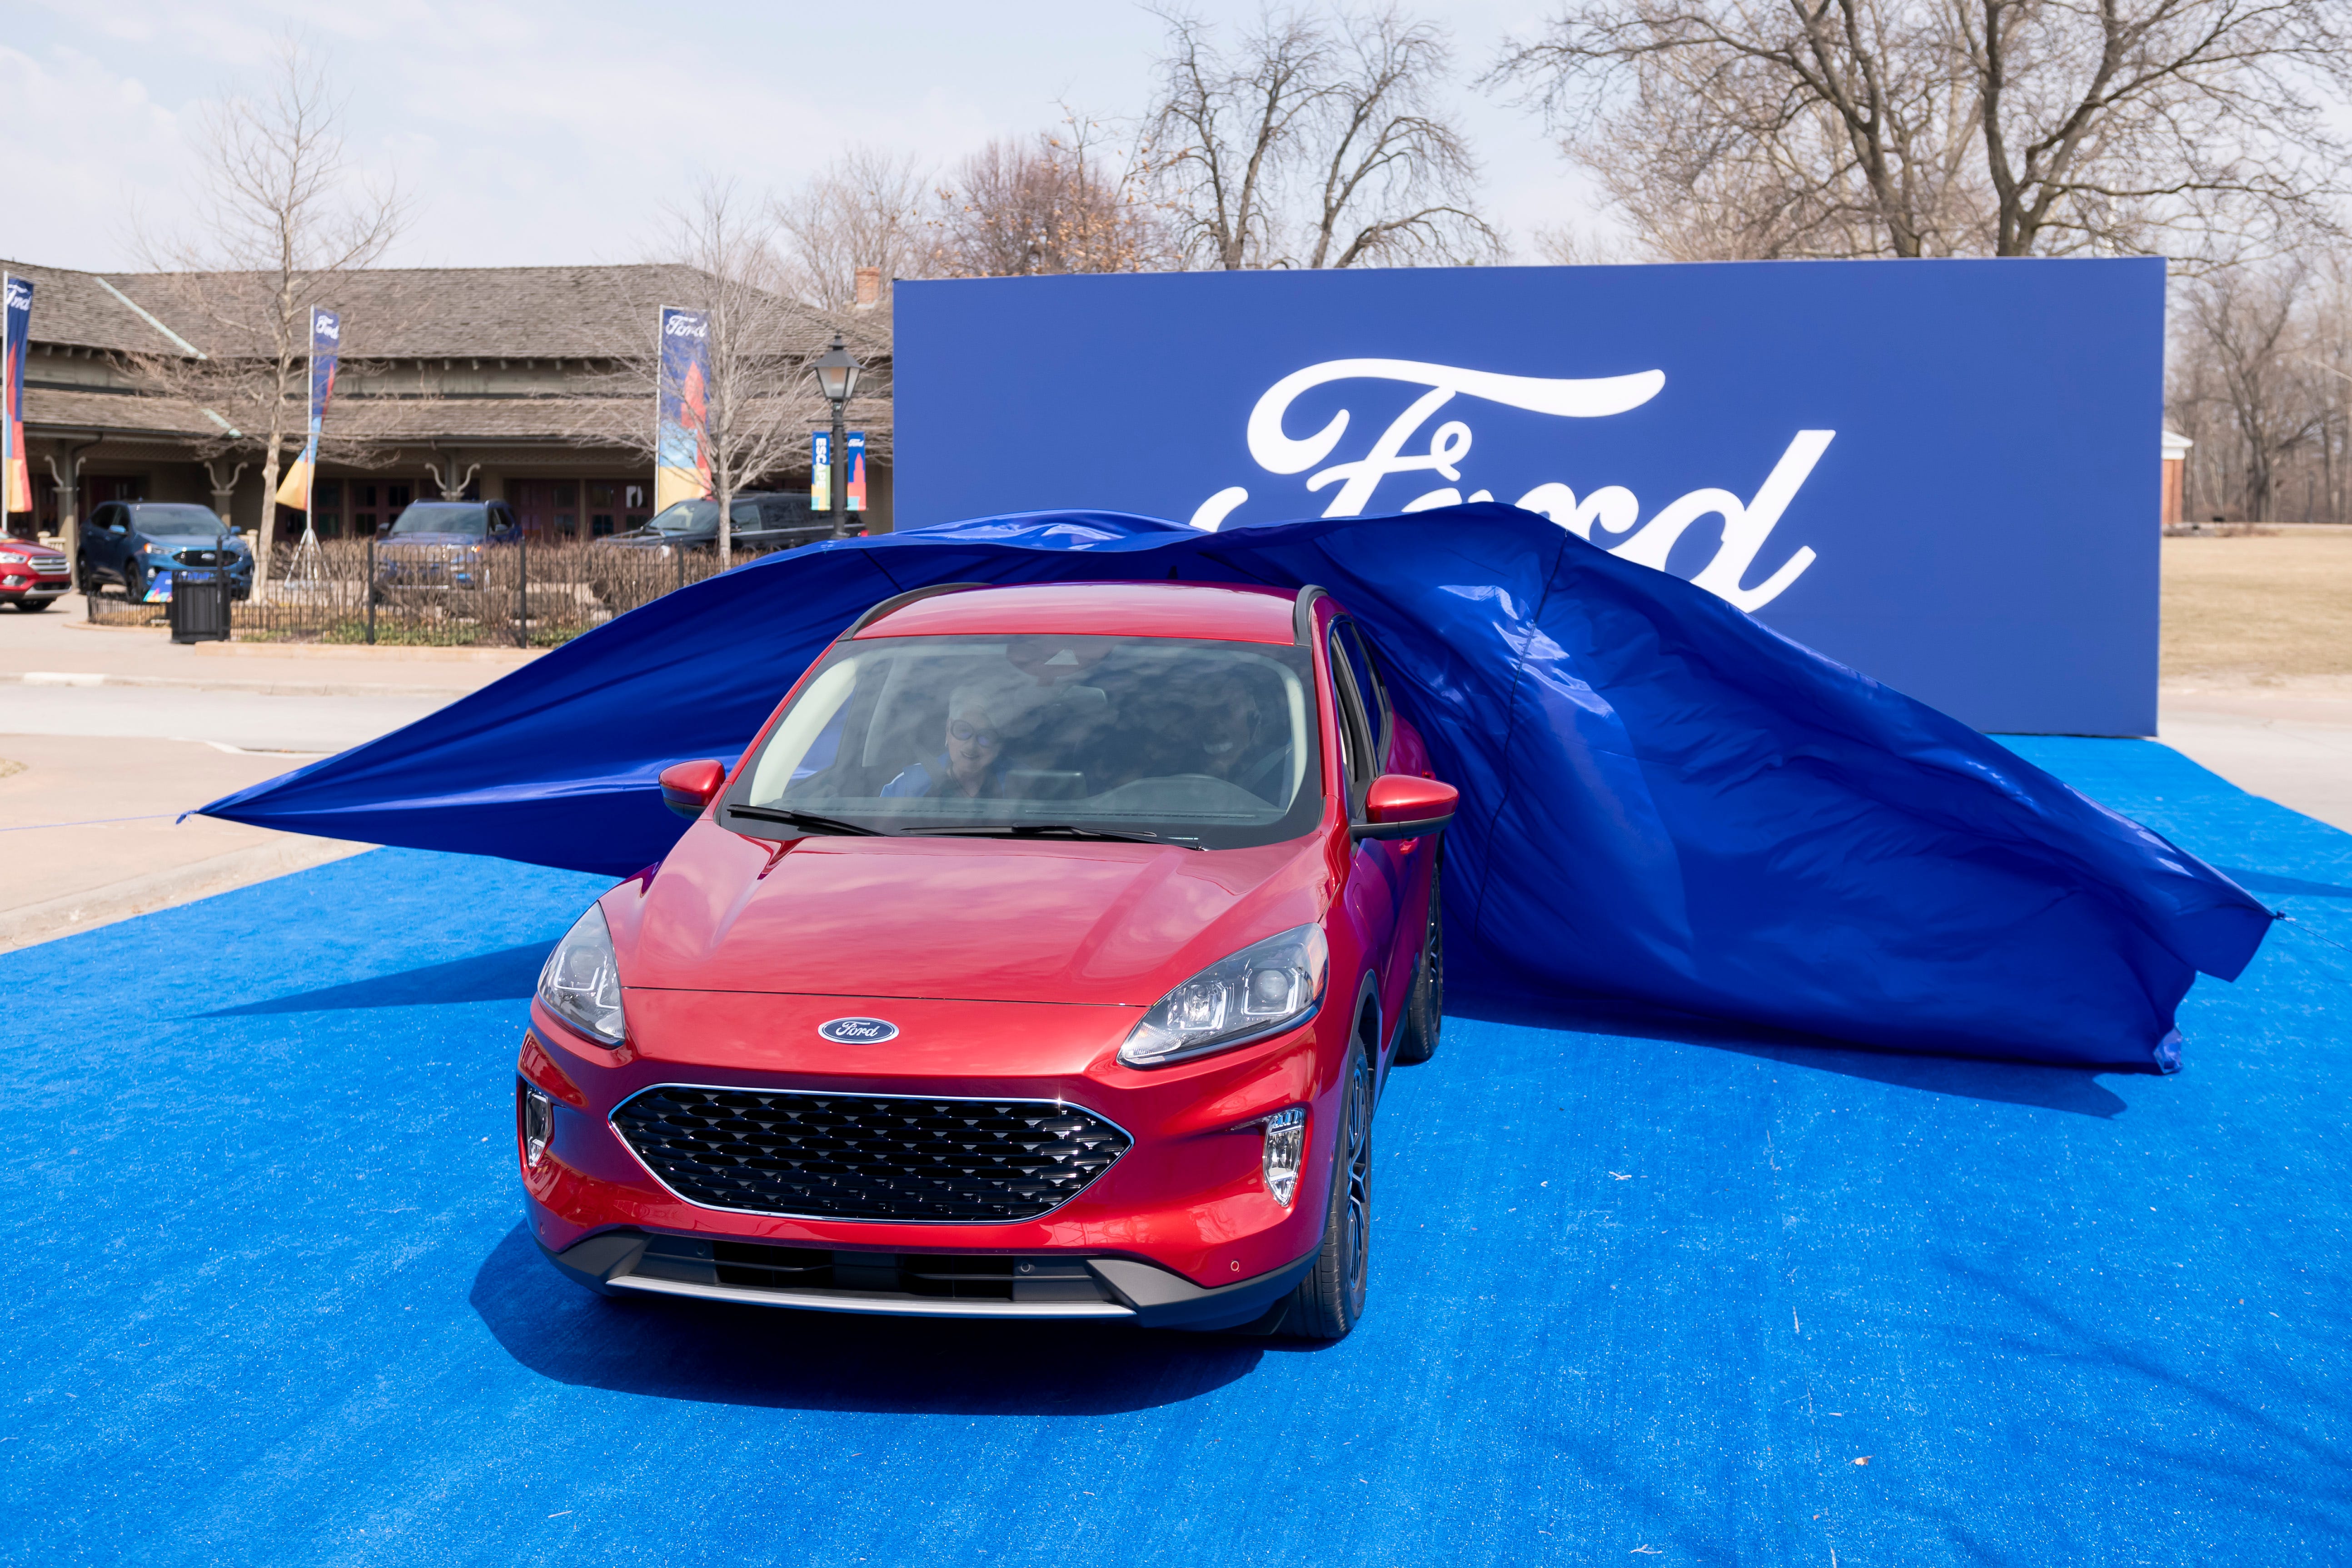 The 2020 Ford Escape is revealed amid much fanfare at Greenfield Village on March 28, 2019. It's the first ground-up redesign of the vehicle in a half decade.